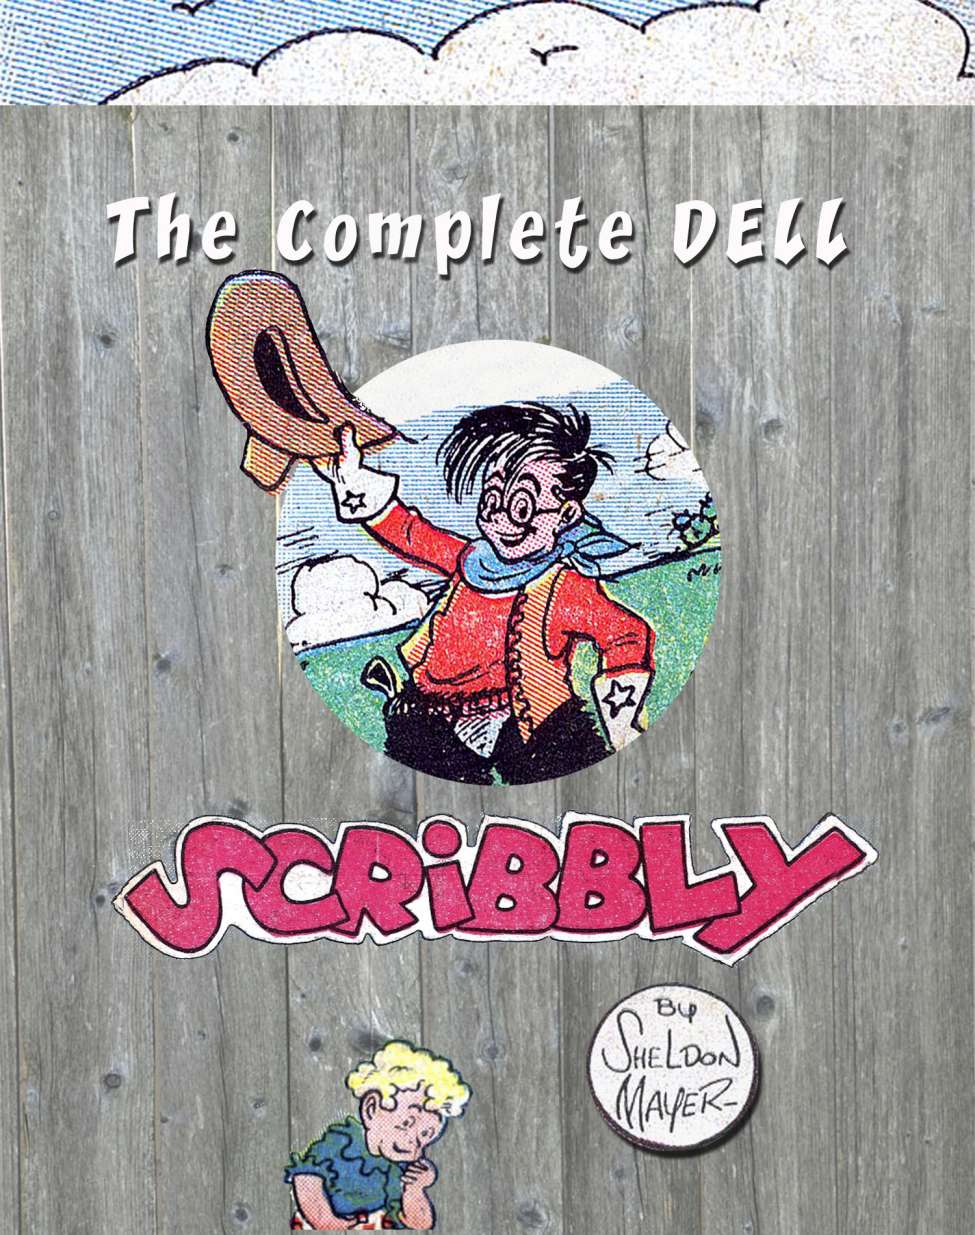 Comic Book Cover For The Complete Dell Scribbly Collection